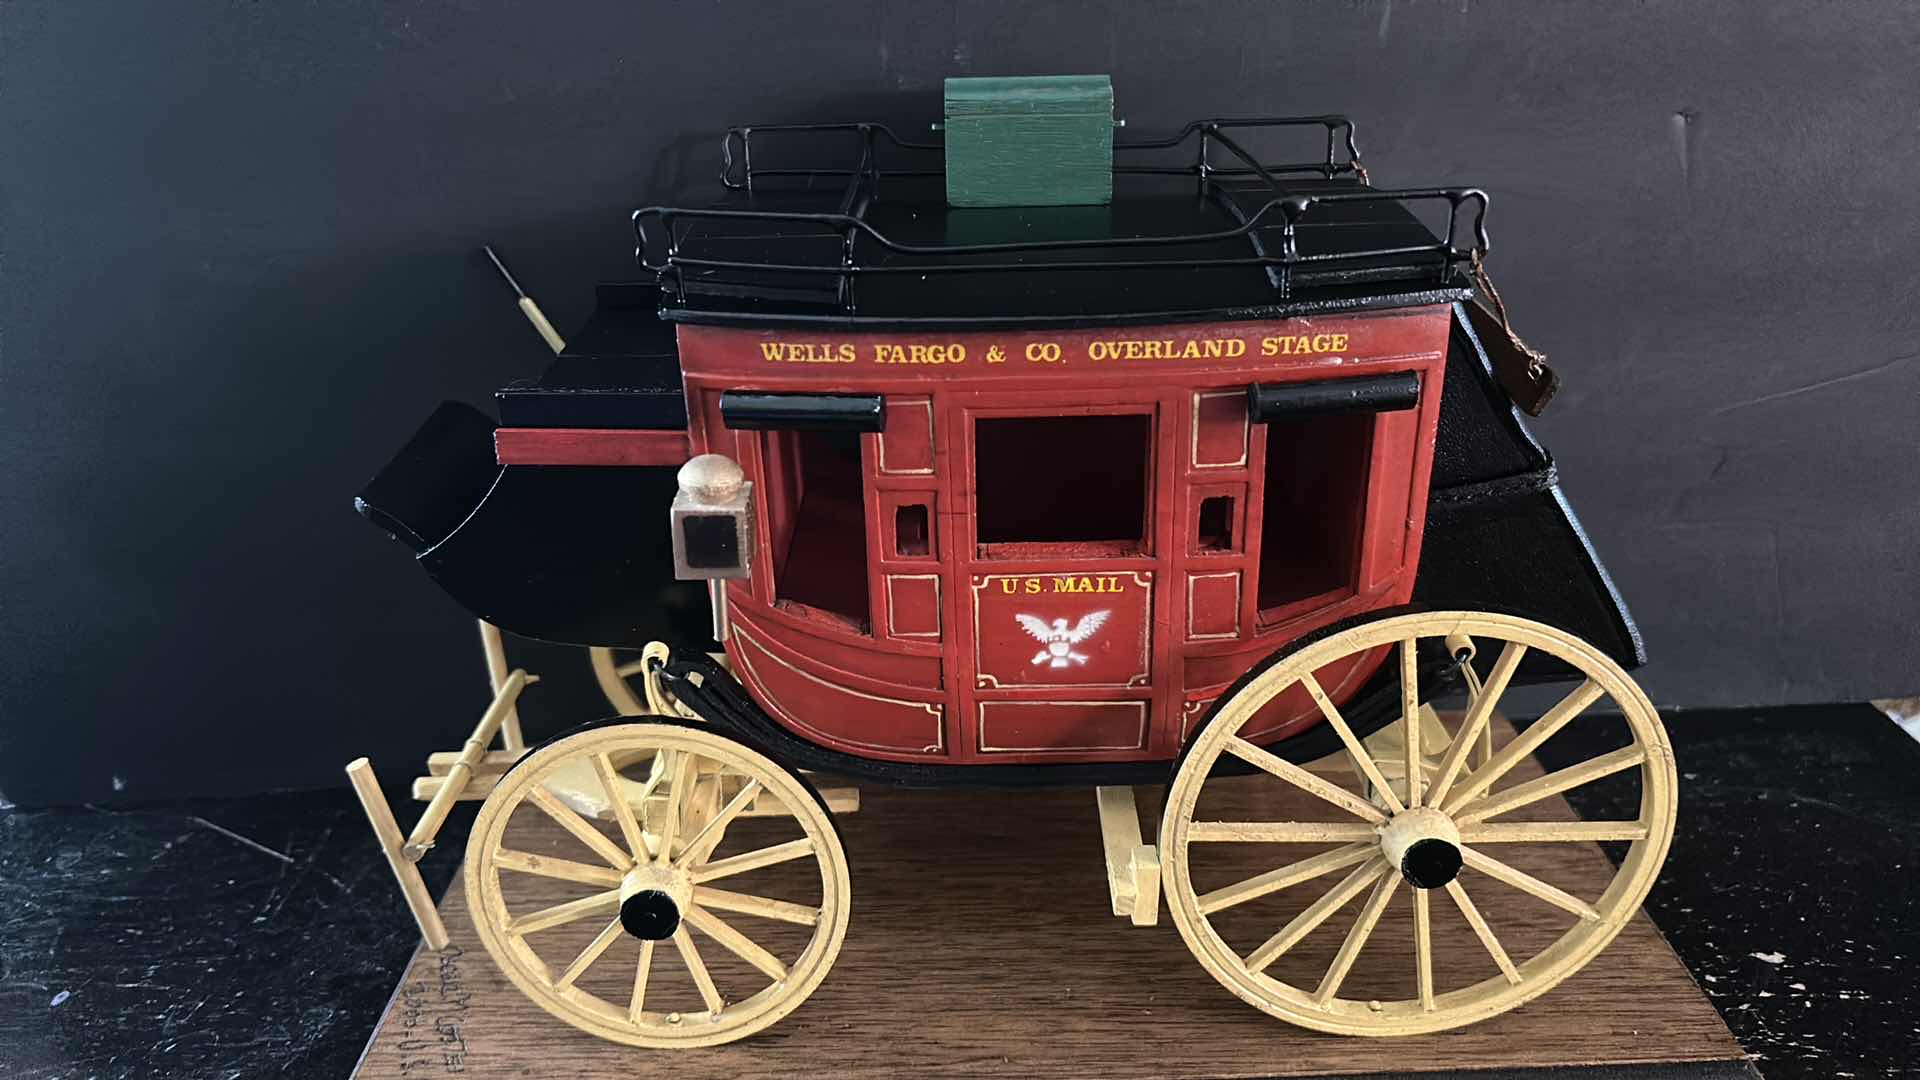 Photo 2 of SIGNED NUMBERED WOODEN WELLS FARGO REPLICA STAGECOACH WAGON 13” x 6 1/2” x 9”